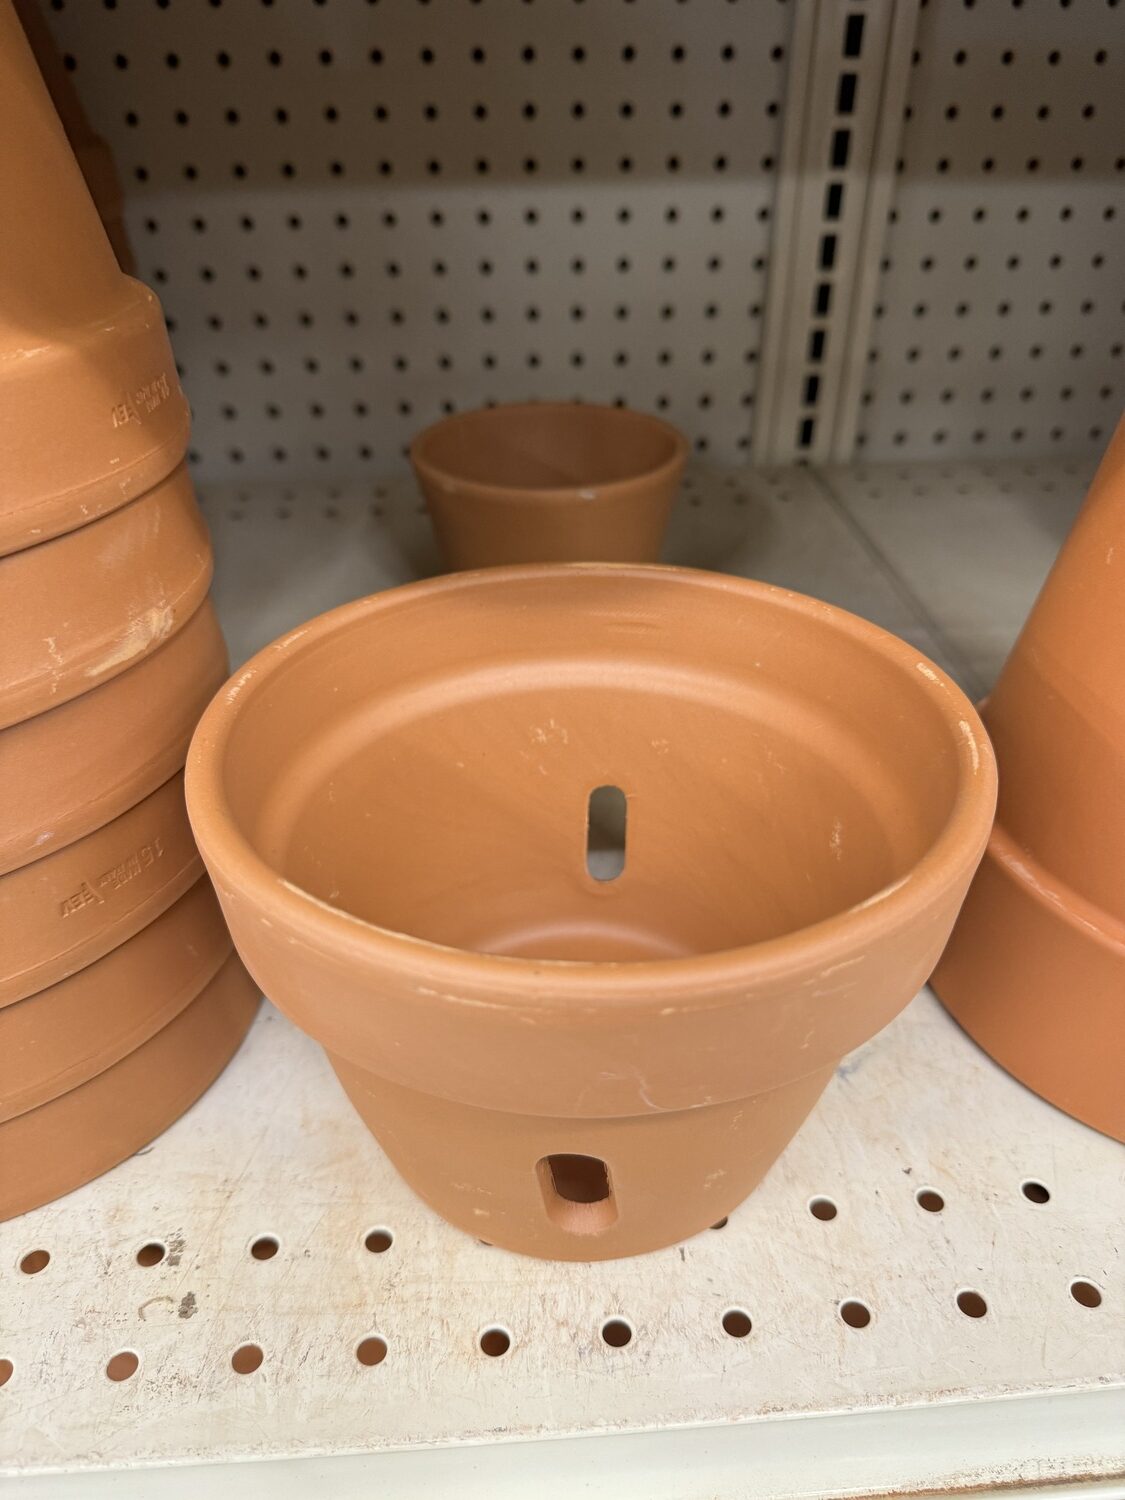 Orchids and a few other plants don’t do well without perfect drainage. This slotted clay pots allows air into the root zone so moisture can leave the pot and moist air can freely circulate in the root area.
ANDREW MESSINGER